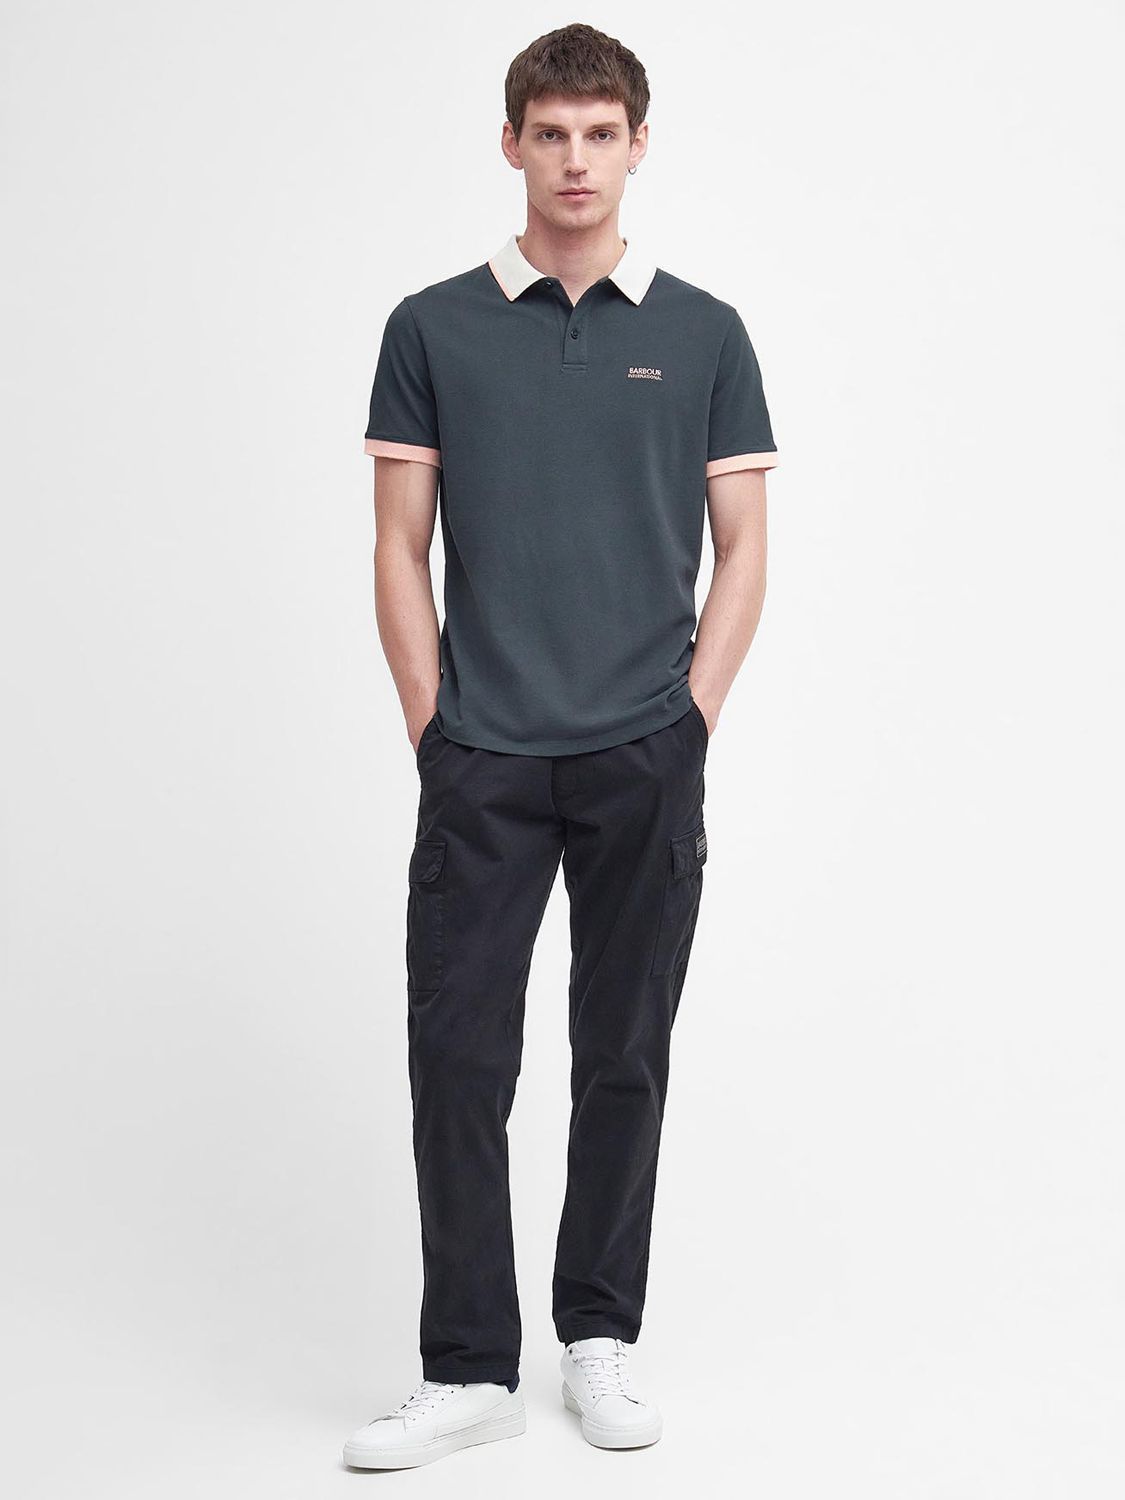 Barbour International Howall Polo Shirt, Green at John Lewis & Partners